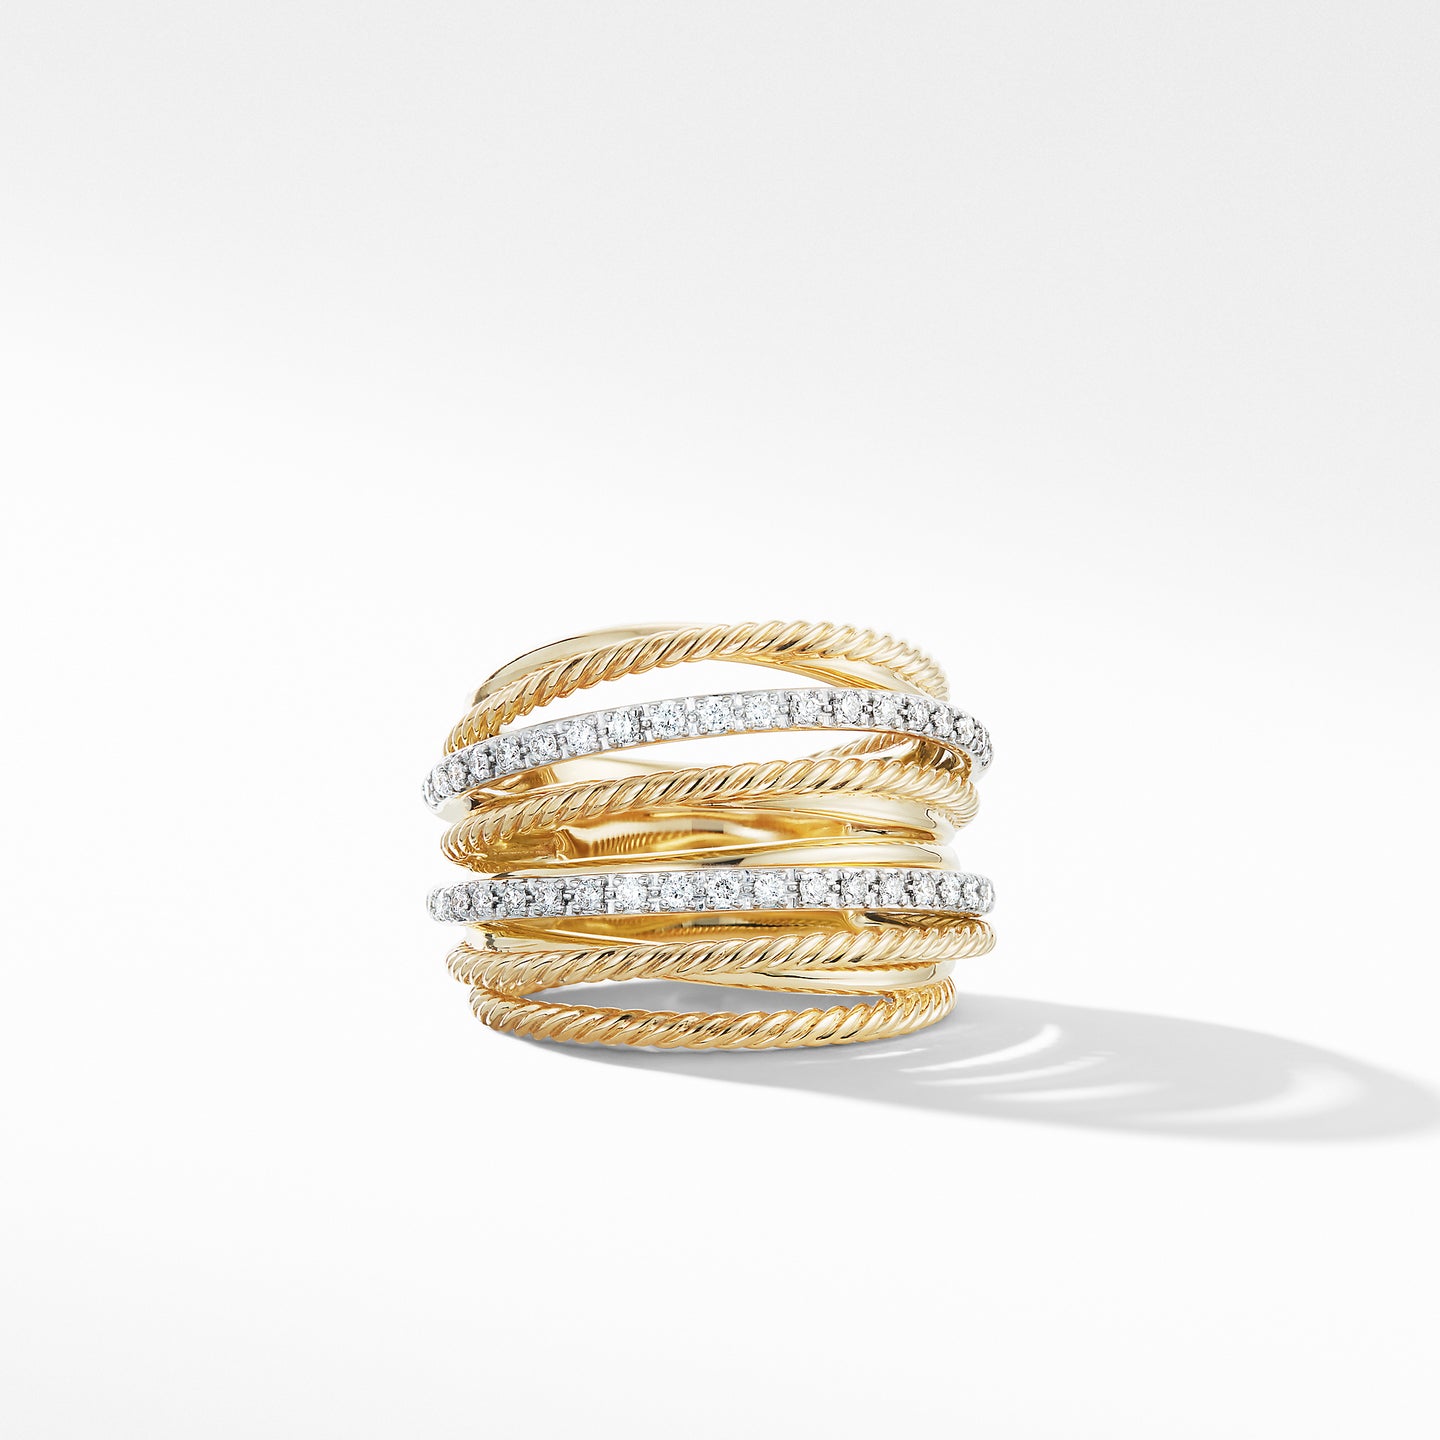 Crossover Wide Ring in 18K Yellow Gold with Diamonds, Size 7